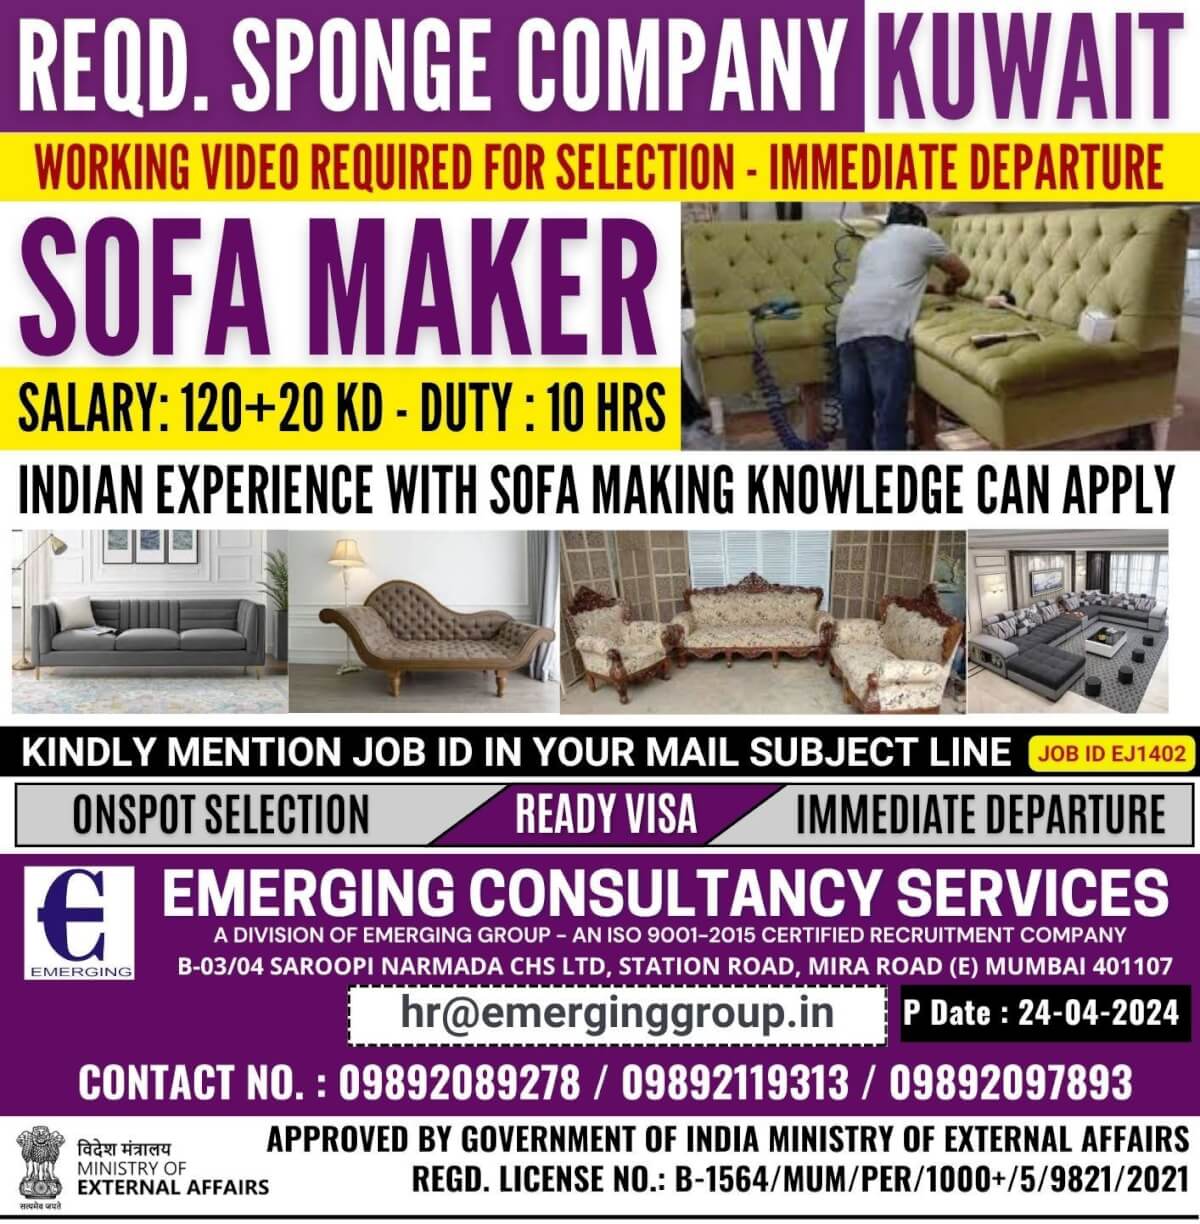 URGENTLY REQUIRED FOR SPONGE COMPANY IN KUWAIT - WORKING VIDEO REQUIRED FOR SELECTION